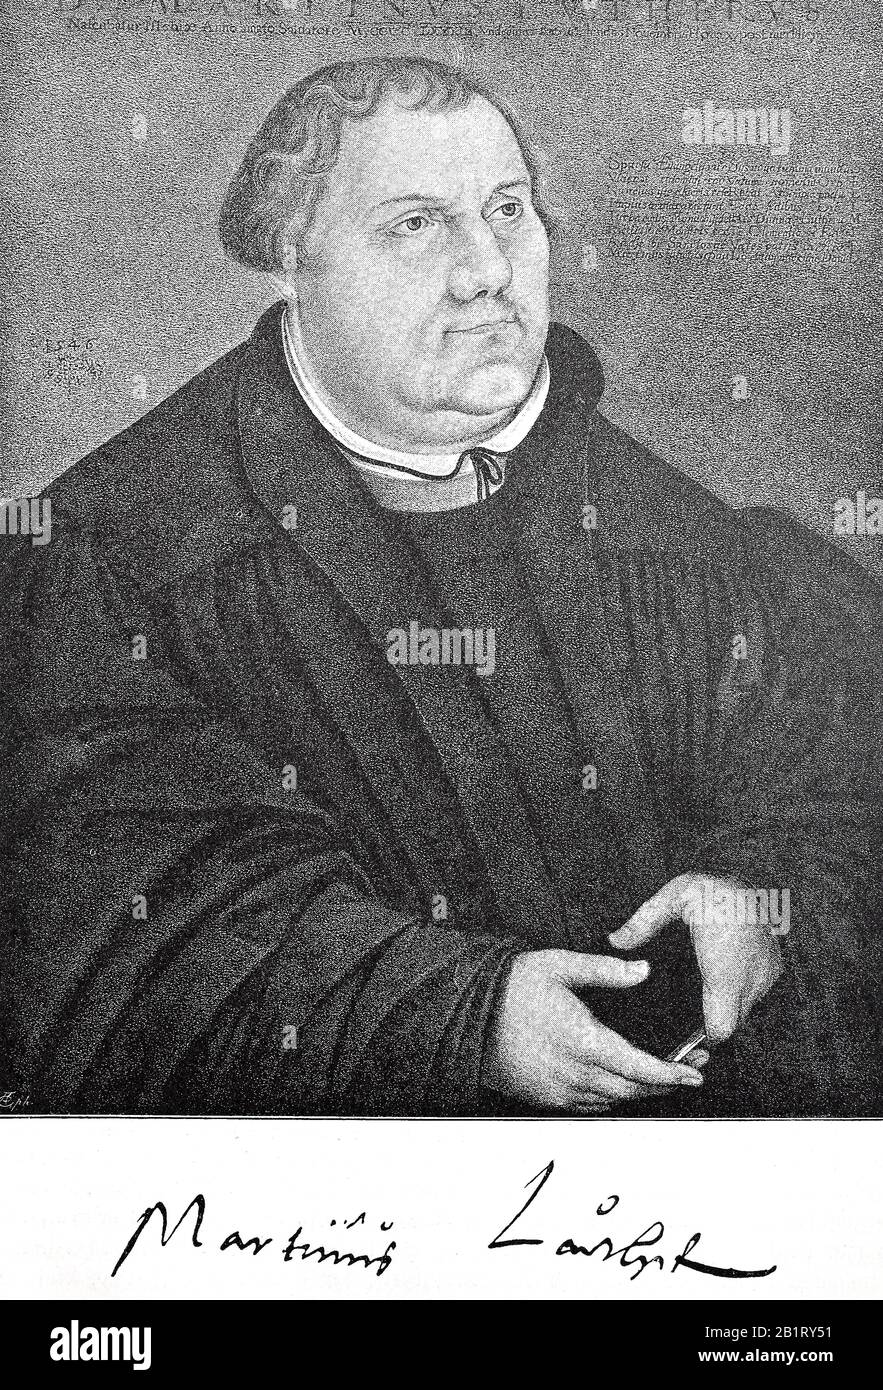 Martin Luther, 10 November 1483 - 18 February 1546 was a German professor of theology, composer, priest, monk, and a seminal figure in the Protestant Reformation.   /  Martin Luther, 10. November 1483 - 18. Februar 1546, ein Augustinermönch und Theologieprofessor, war der Initiator der Reformation, Historisch, digital improved reproduction of an original from the 19th century / digitale Reproduktion einer Originalvorlage aus dem 19. Jahrhundert Stock Photo